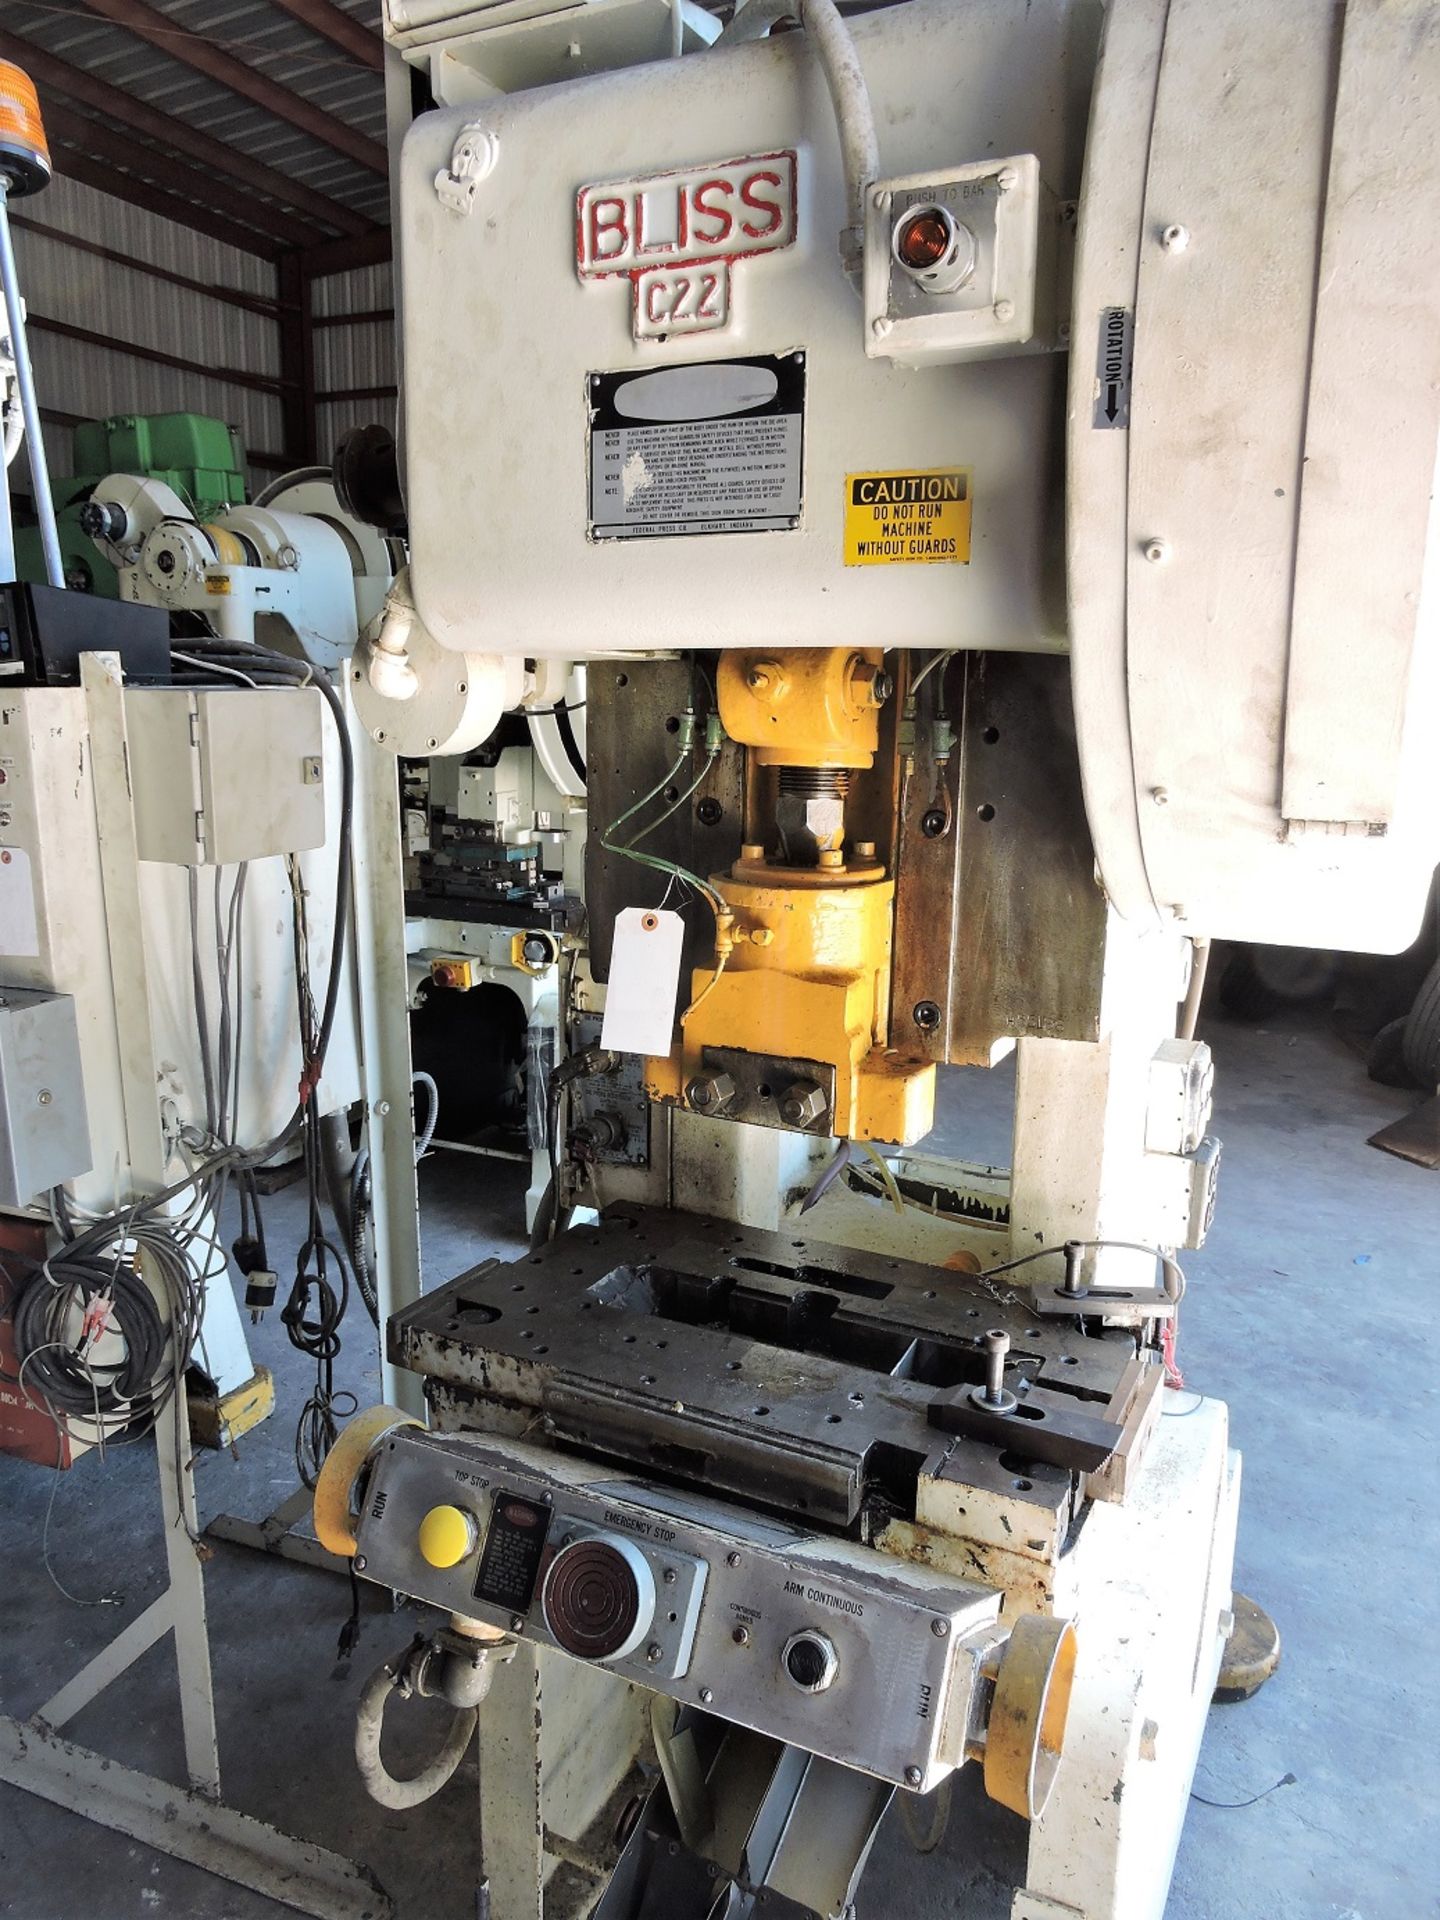 22 Ton Bliss Federal Model C-22 OBI Punch Press (1989) Equipped With